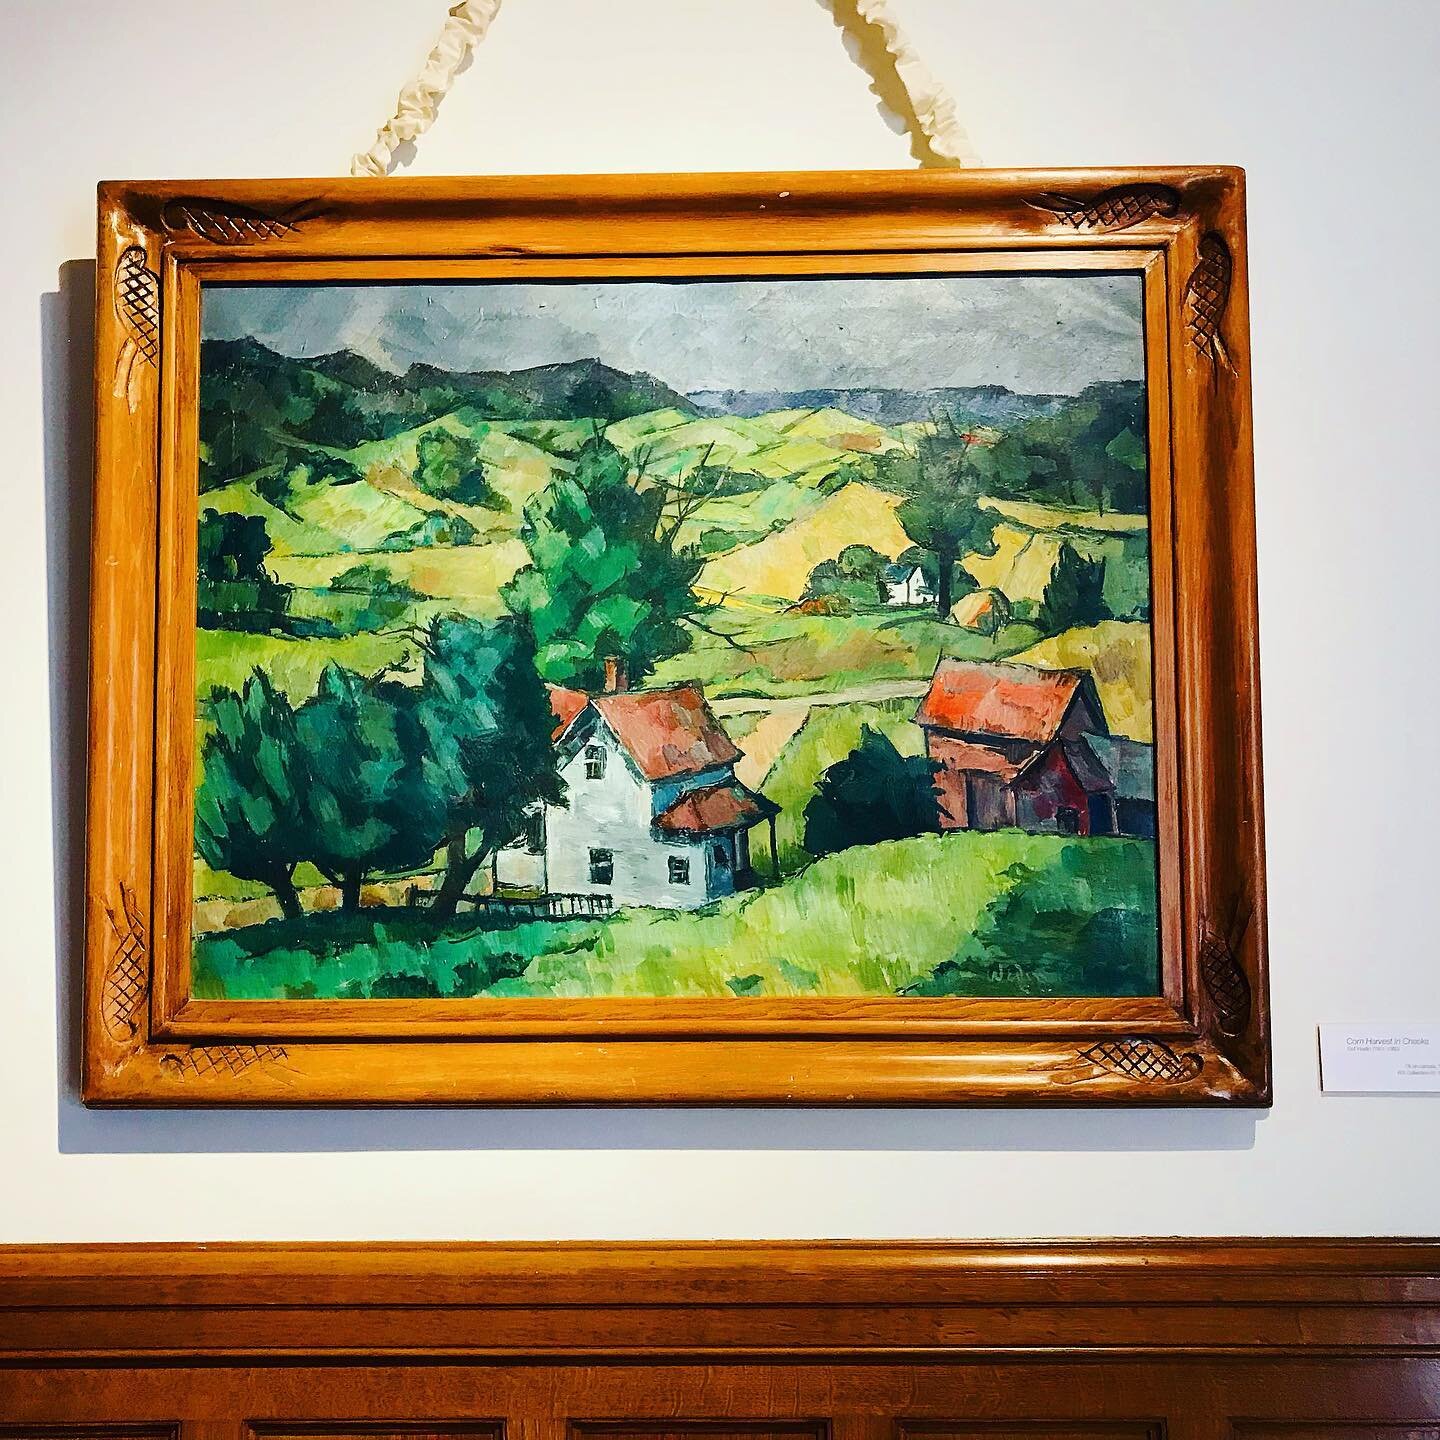 I saw so much interesting artwork over the weekend. I've always loved art (maybe because my grandpa was an artist), especially beautiful landscapes that take you wherever it's set. Sort of like a good book. What about you? Do you like art? 
*By the w